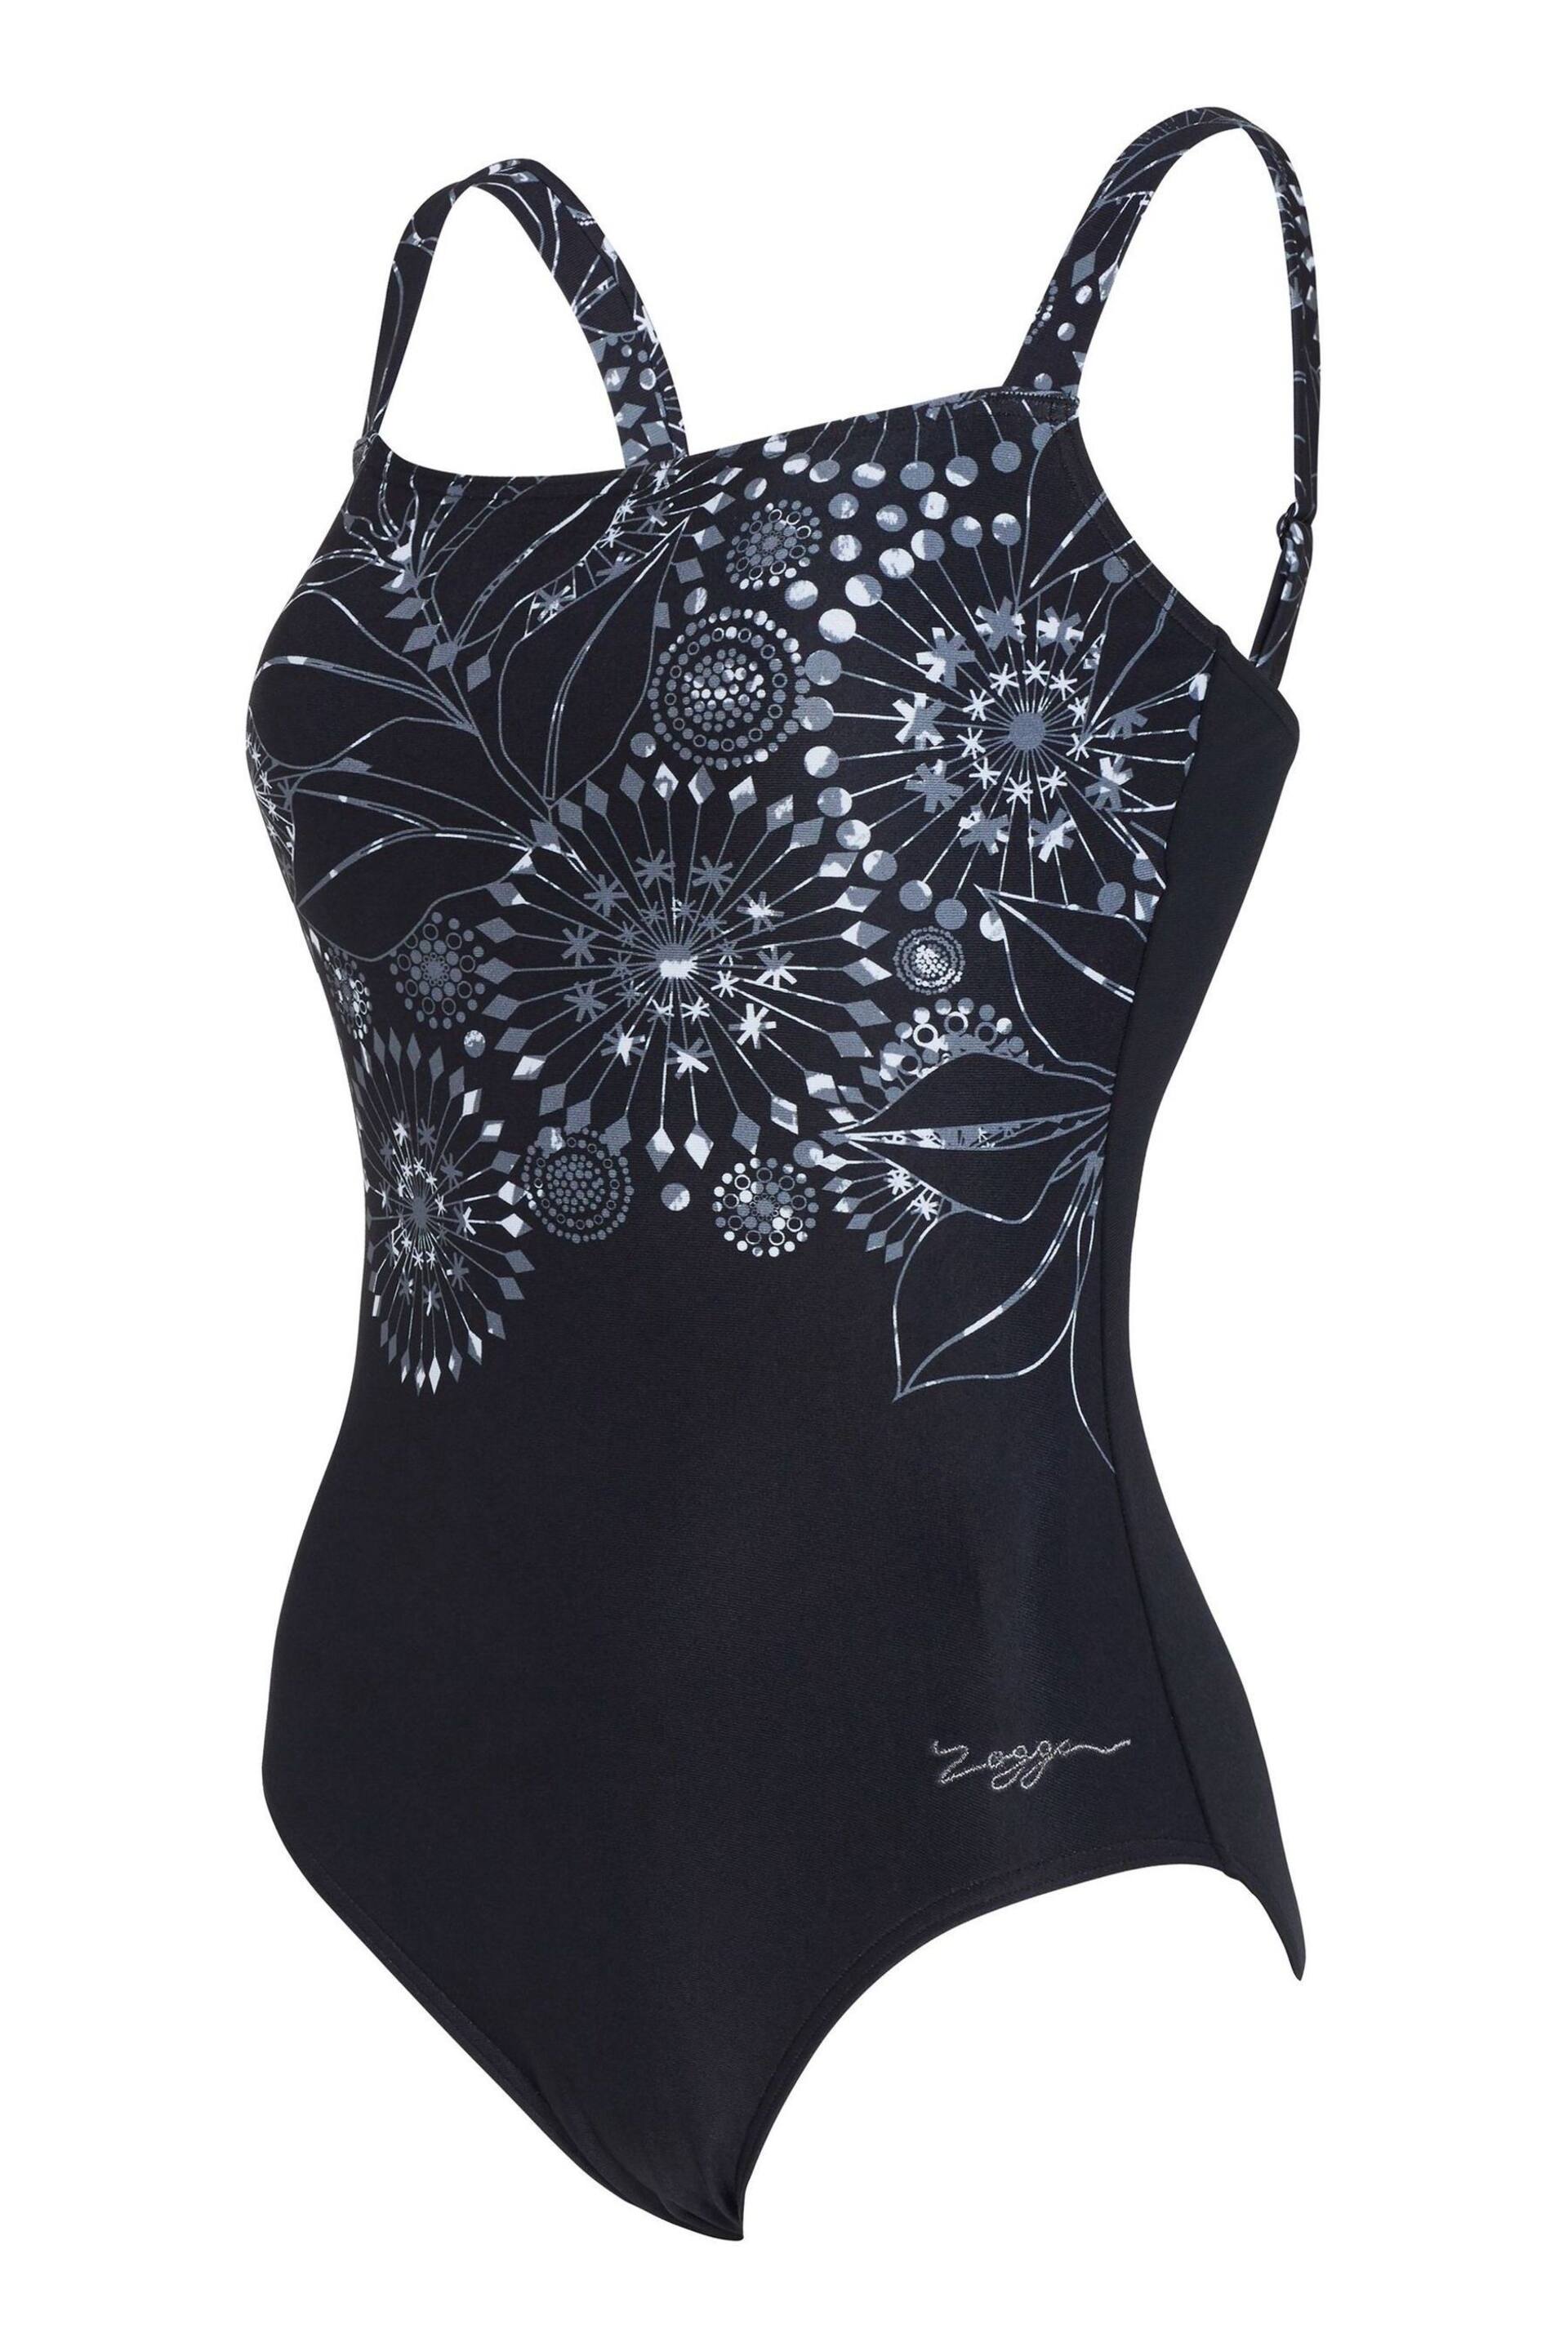 Zoggs Adjustable Classicback One Piece Swimsuit with Foam Cup Support - Image 7 of 8